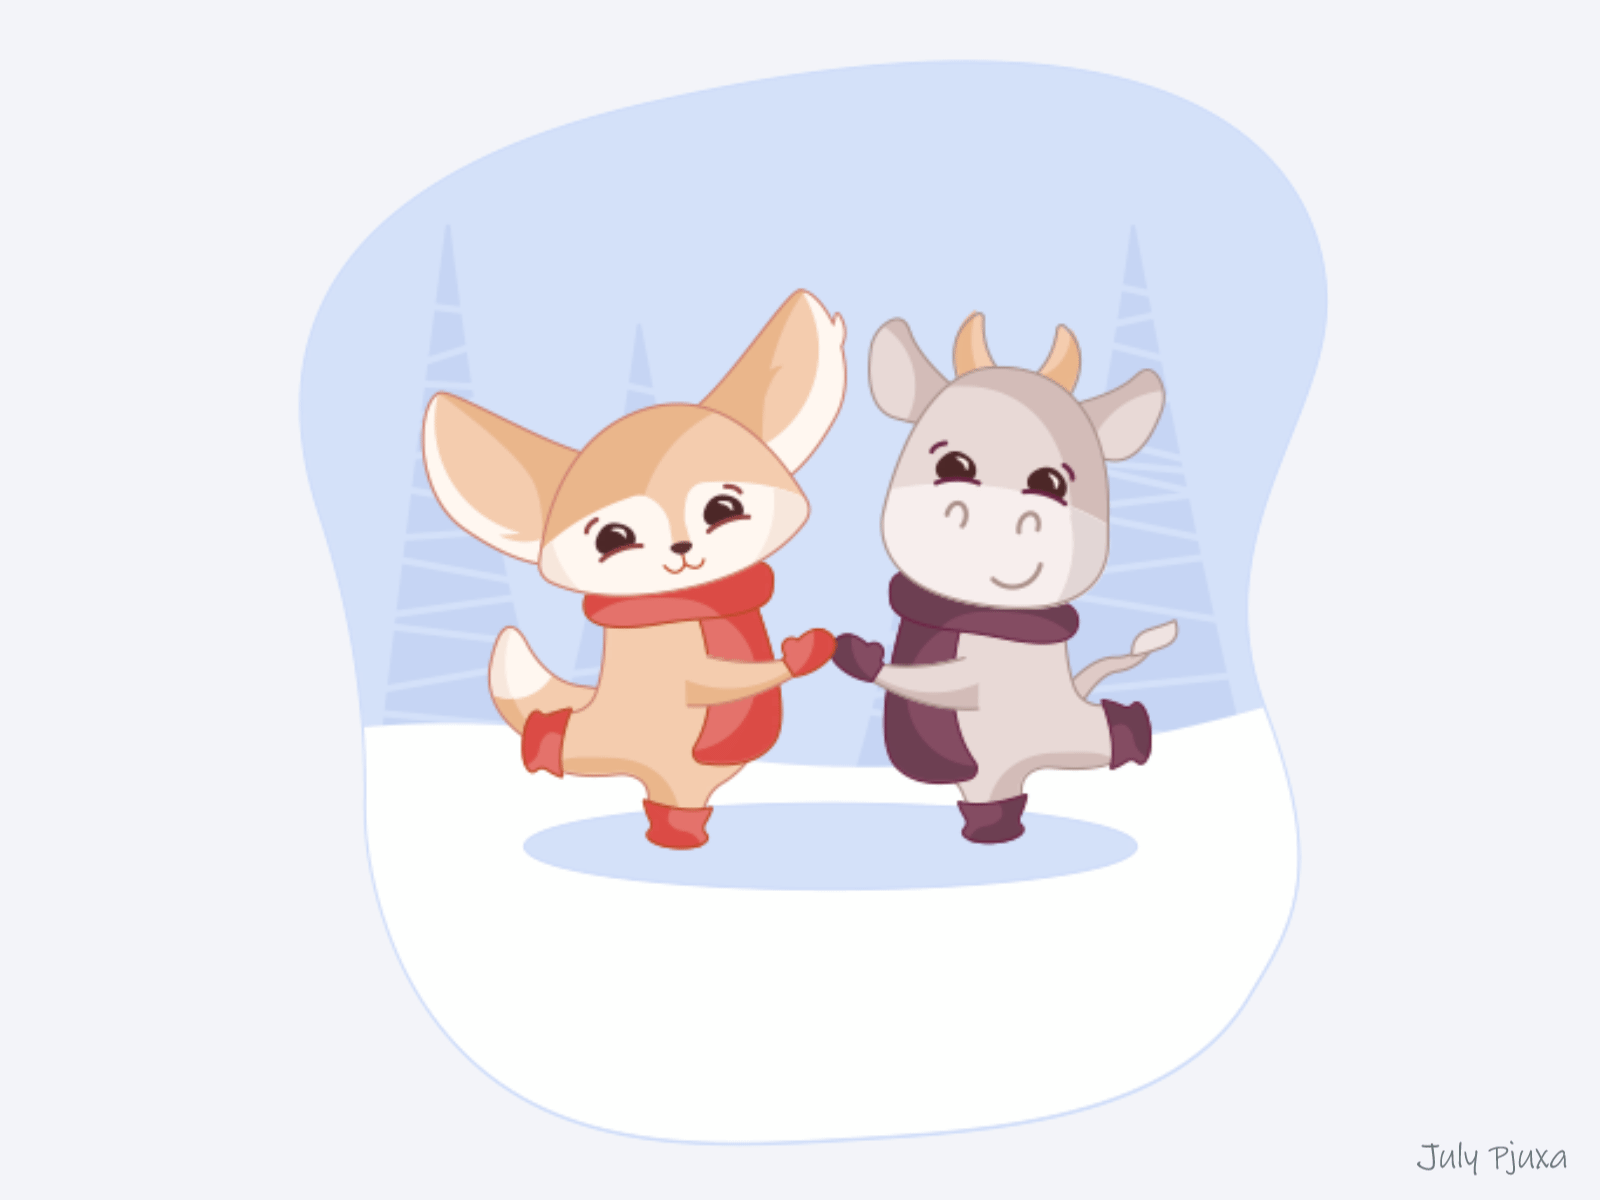 Christmas Fennec Fox: story 0.5 "Best Friends" after affects animation bull charachter christmas fennec fennec fox julypjuxa little bull vector vector artwork